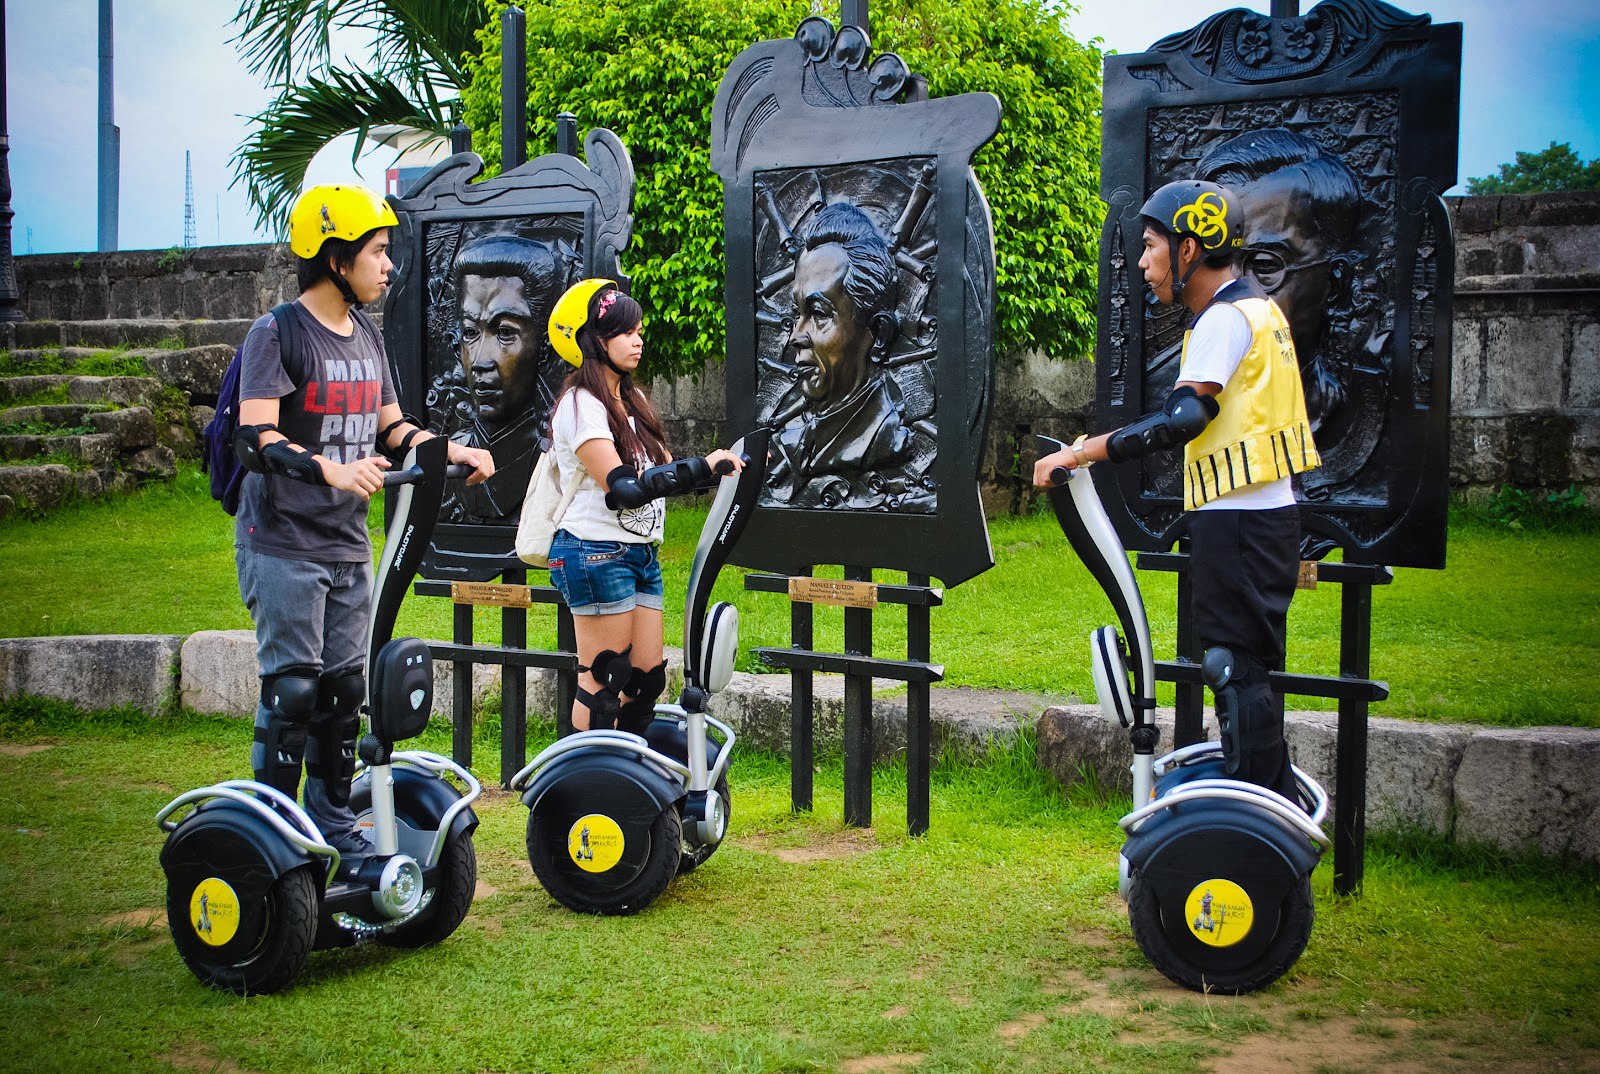 Intramuros things to do - White Knights Electric Chariots